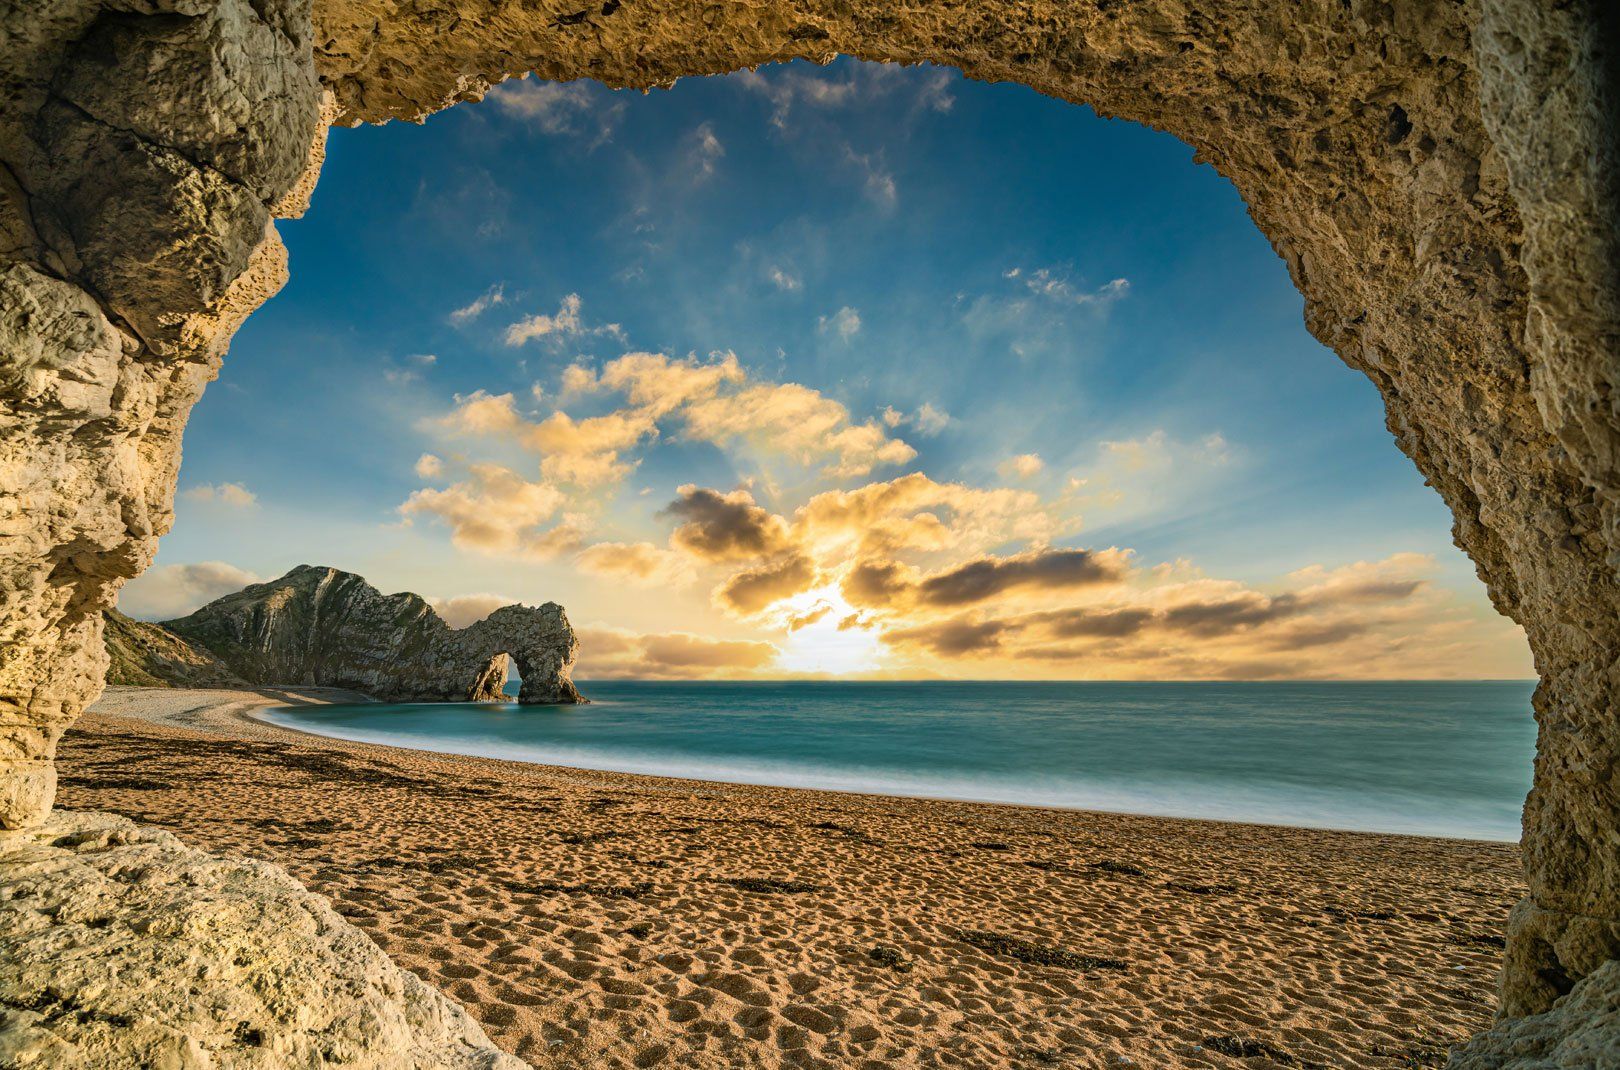 Scenic view of Durdle Door, an iconic rock arch on a sandy beach along the Jurassic Coast in Dorset, England